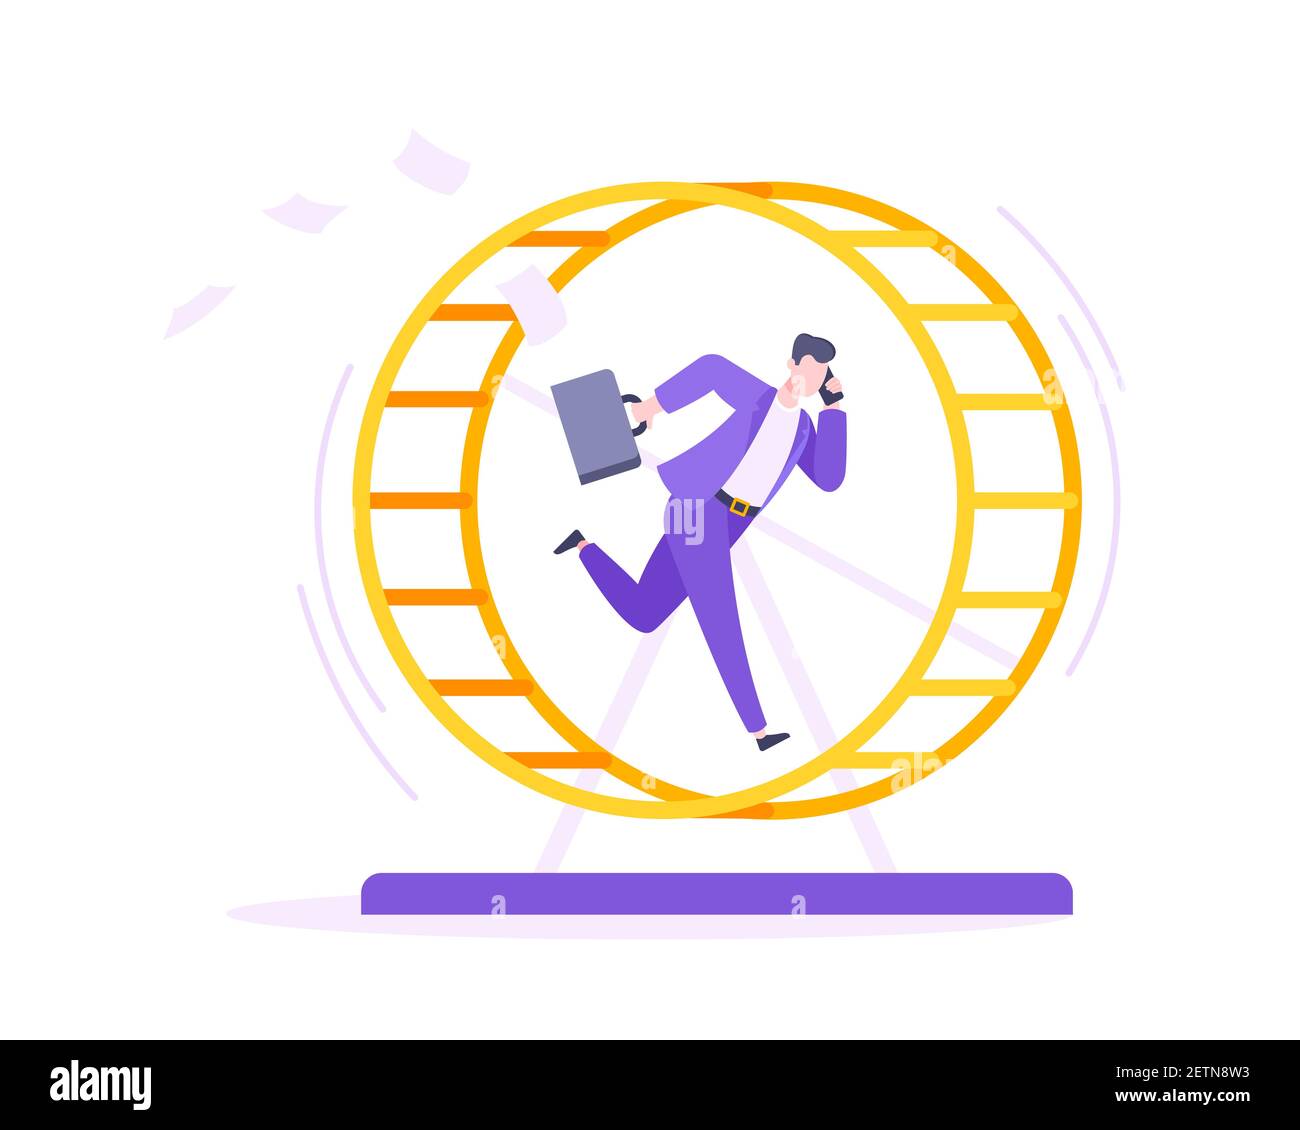 Rat race business concept with businessman running in hamster wheel working hard and always busy flat style design vector illustration. Tired workahol Stock Vector